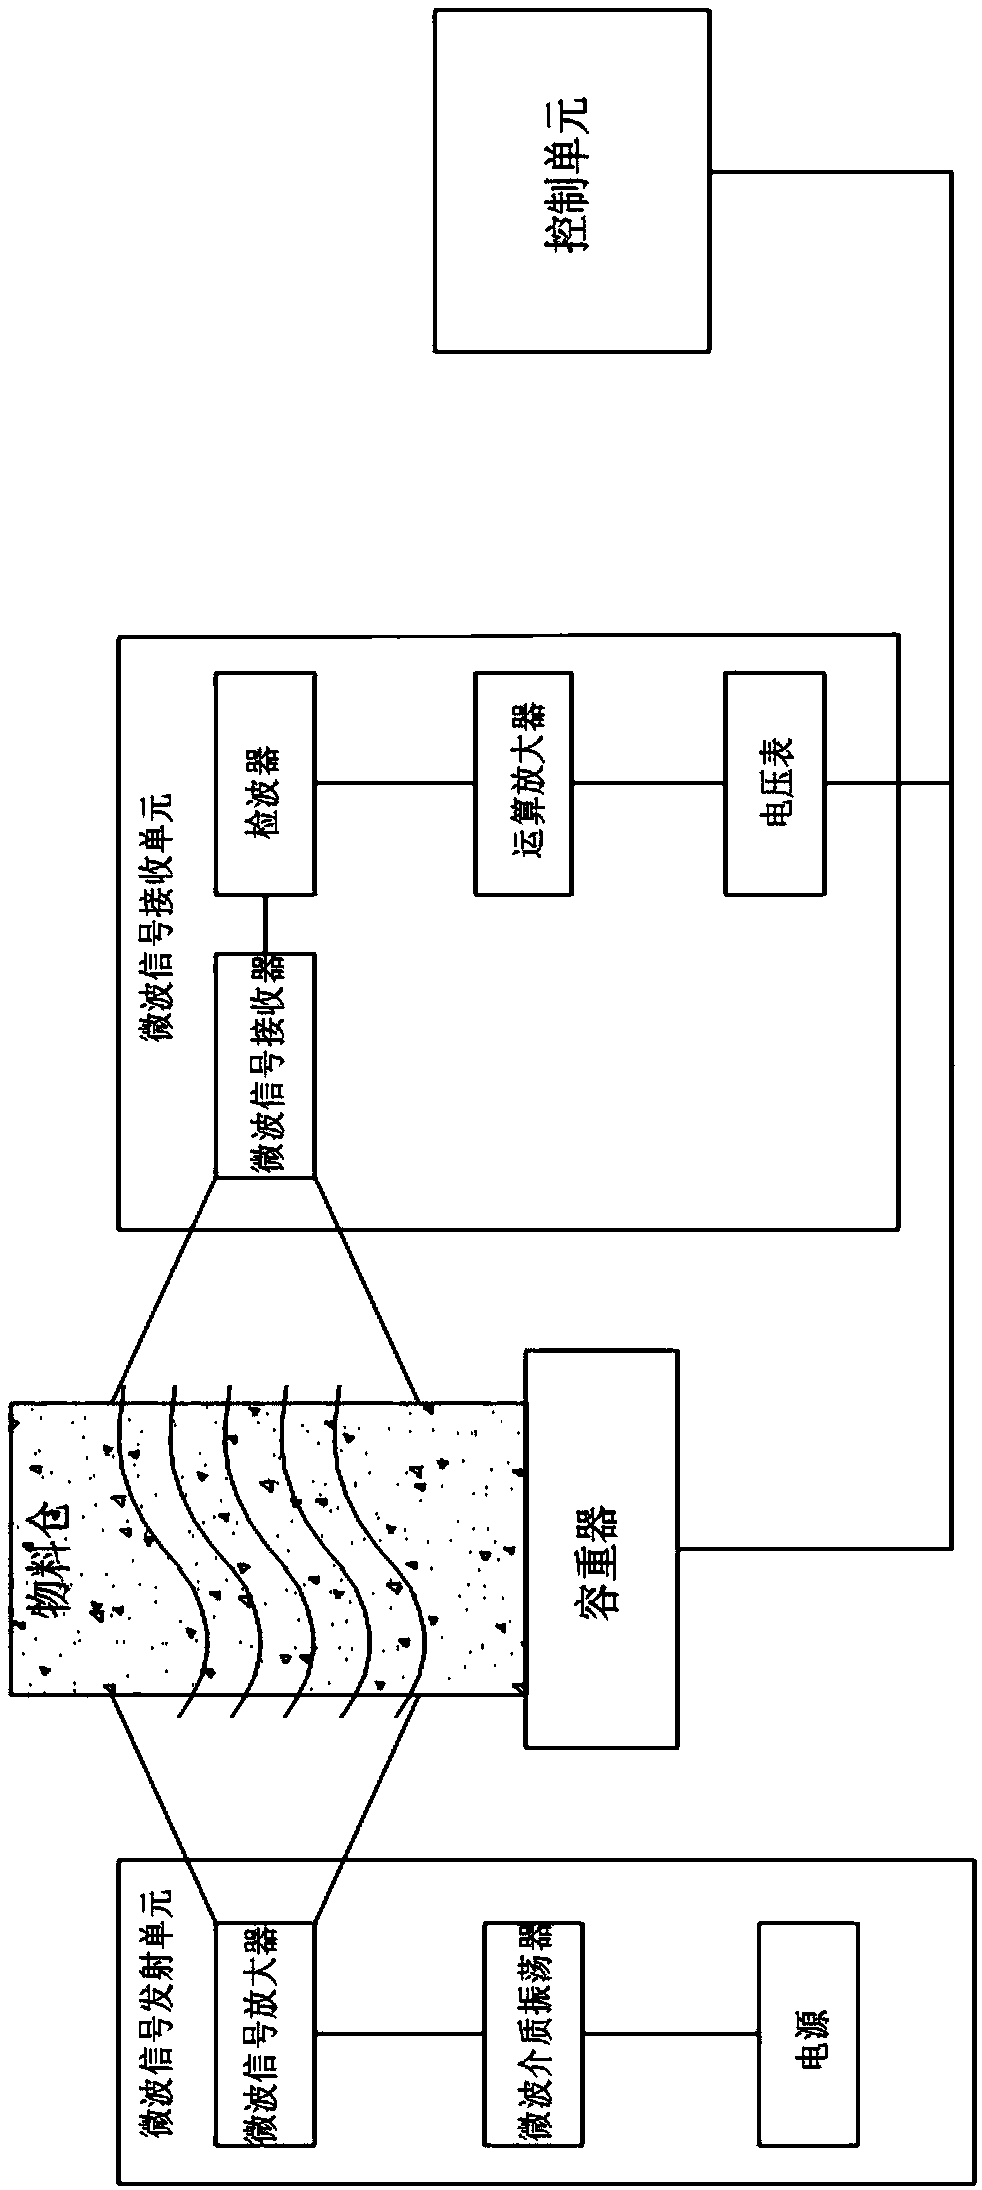 Dual-mode rapid detection system and method for moisture in dry powder for fruits and vegetables